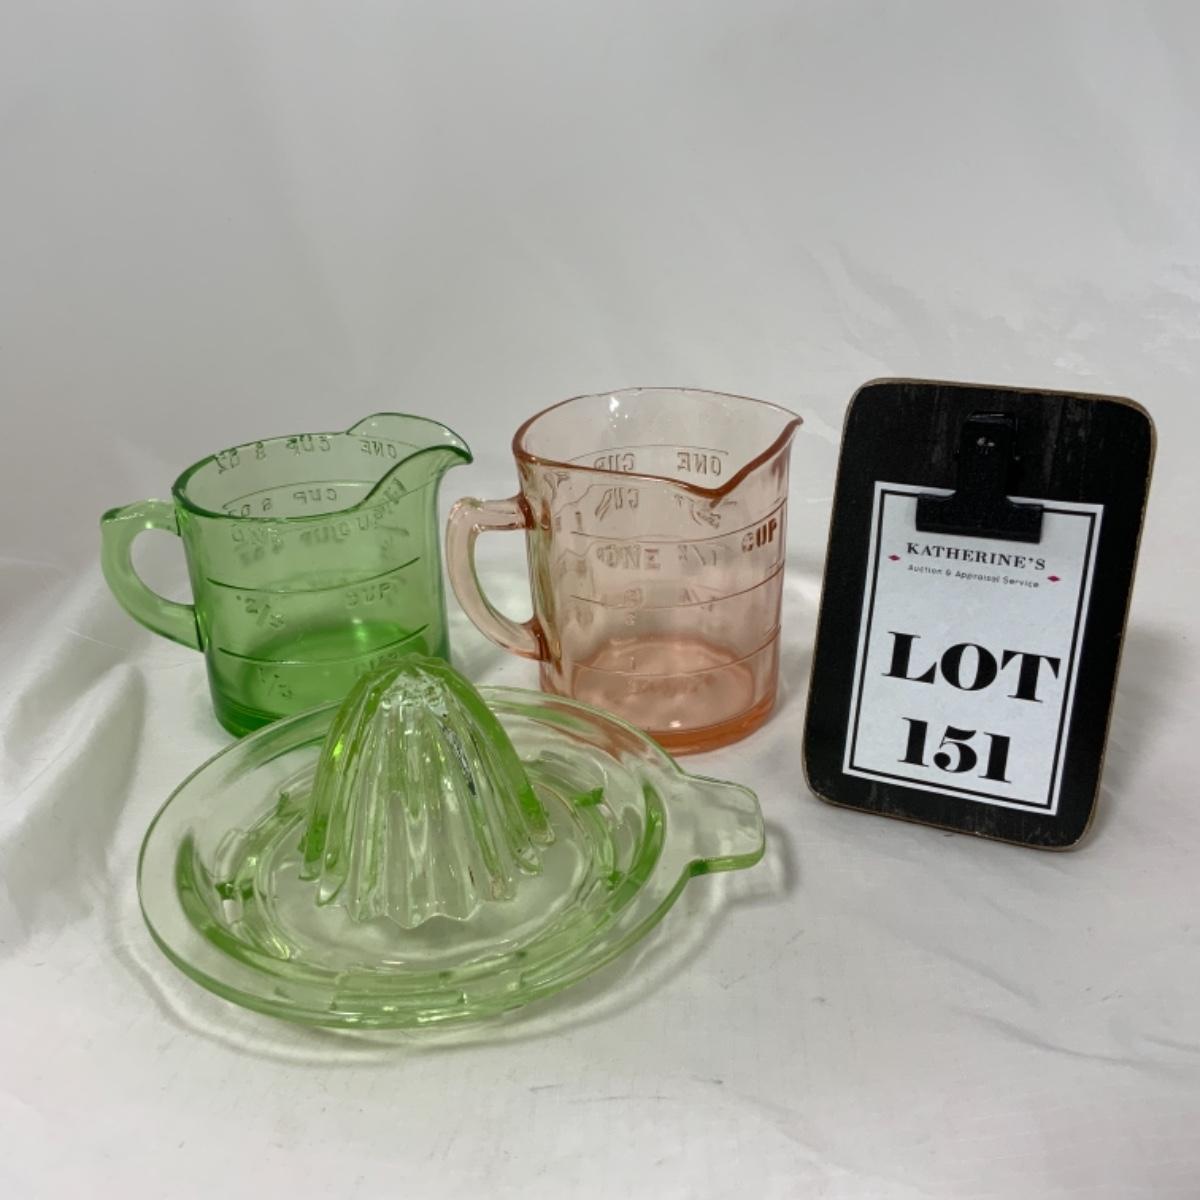 Sold at Auction: Kitchen utensils including Pyrex measuring cups